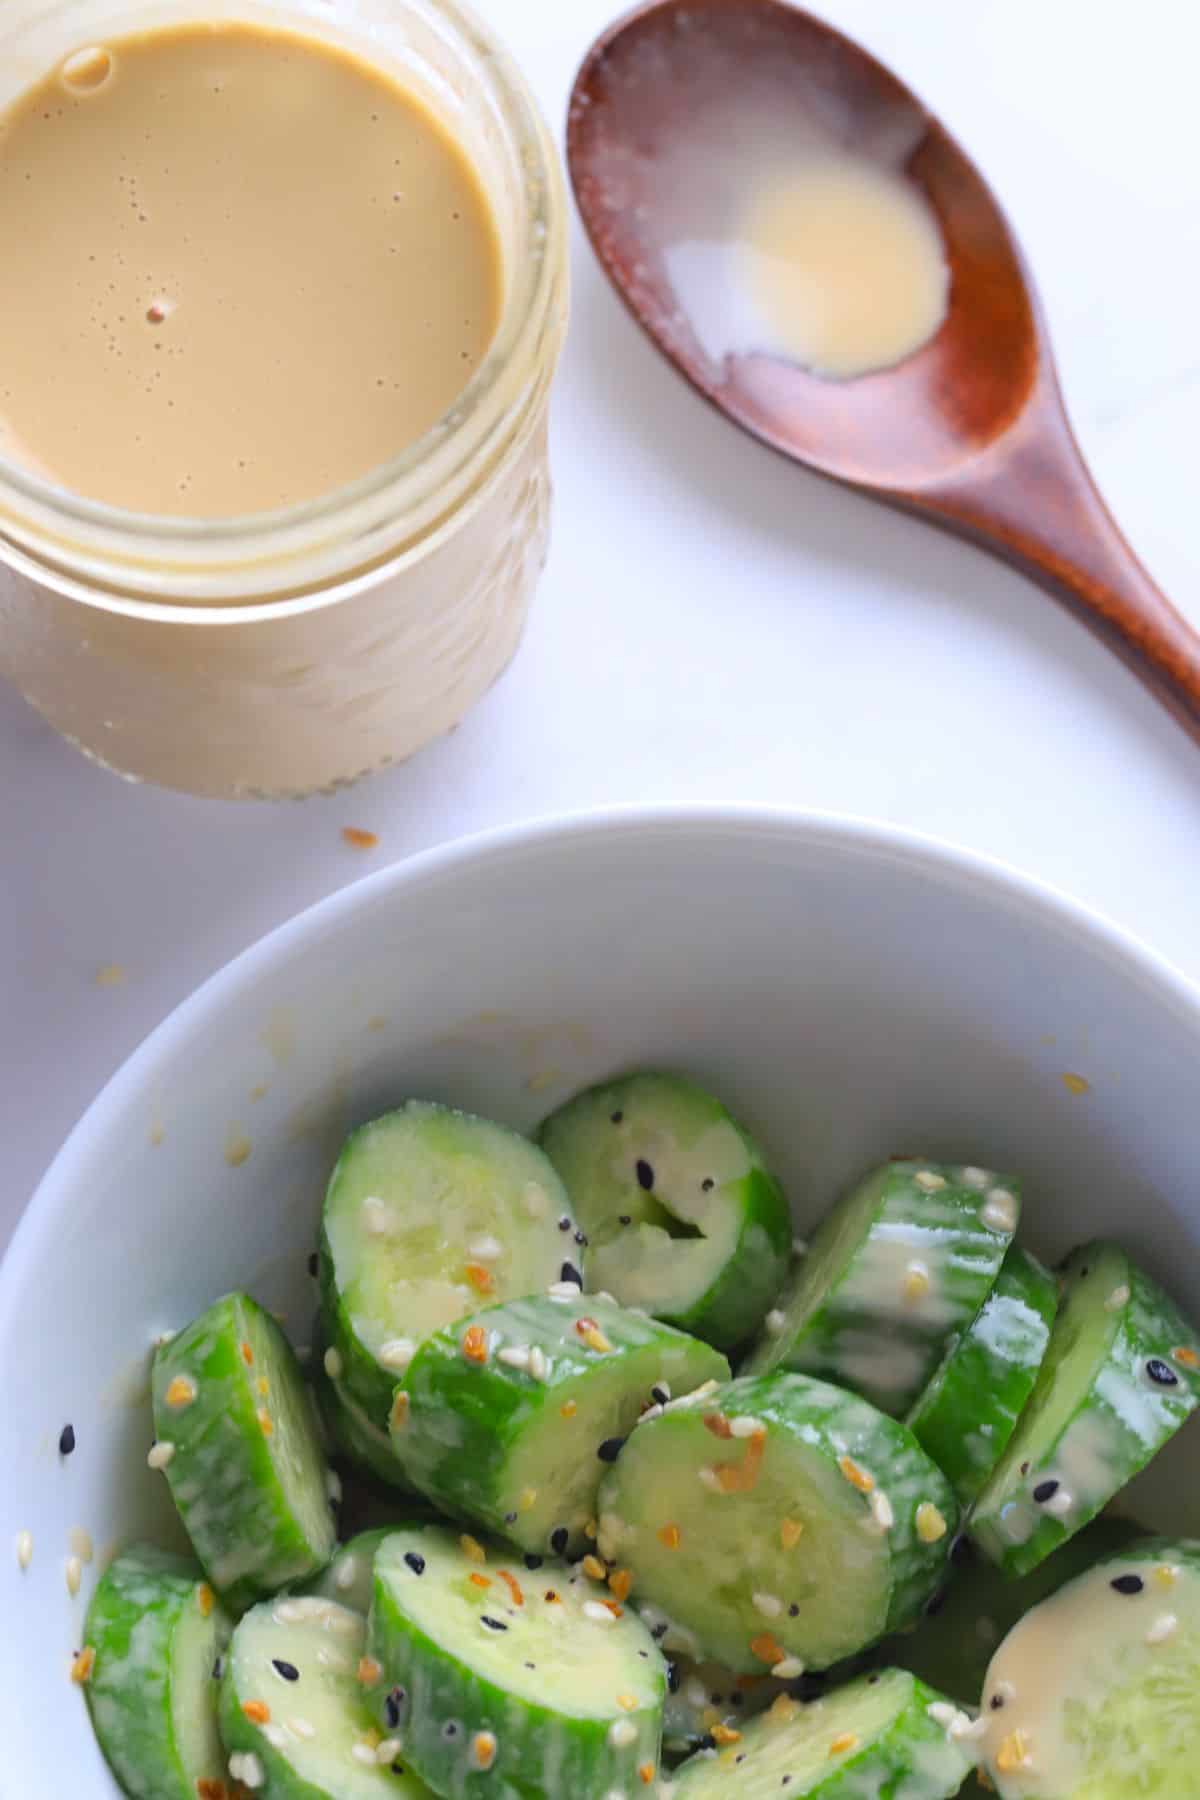 Sugar free salad dressing in a jar next to a wooden spoon and a bowl of sliced cucumbers drizzled with the dressing.